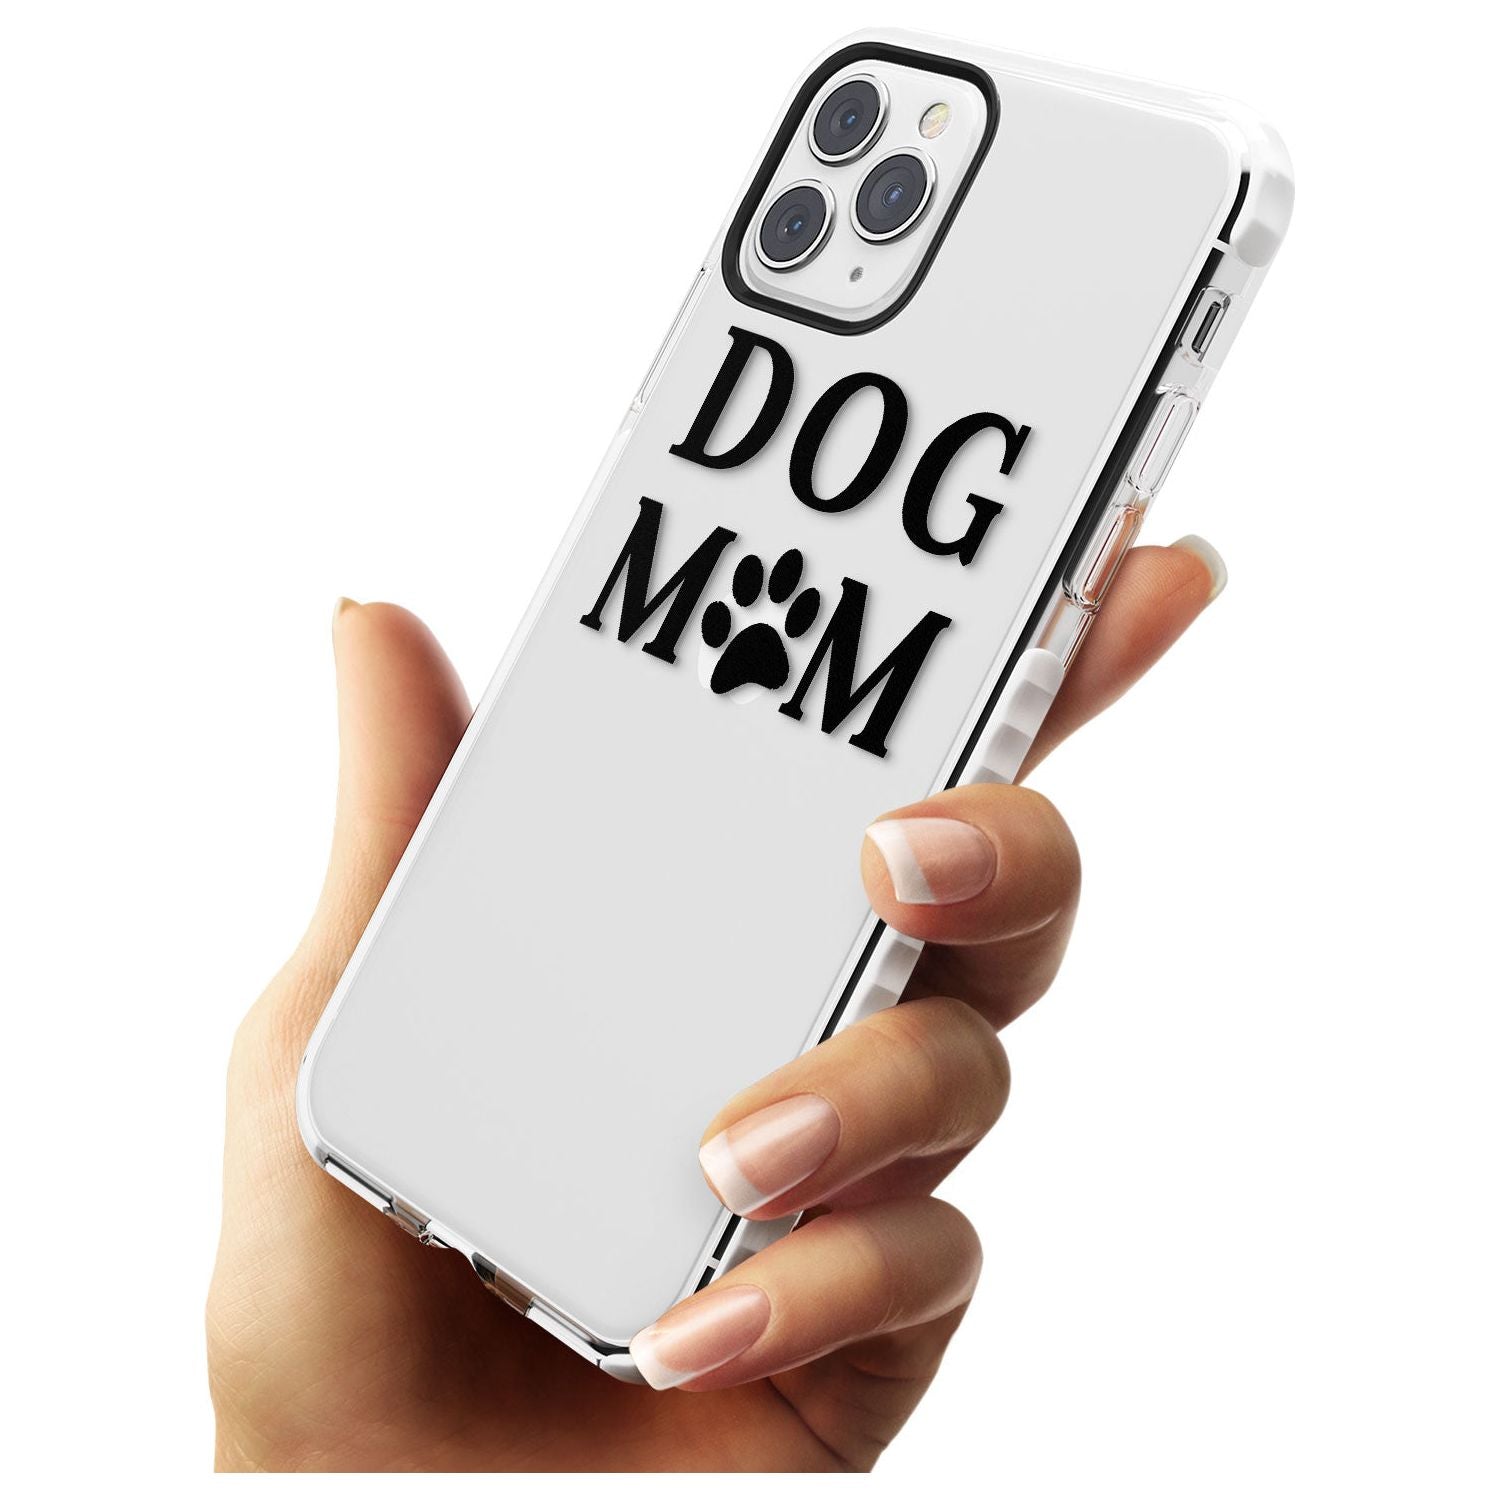 Dog Mom Paw Print Impact Phone Case for iPhone 11 Pro Max